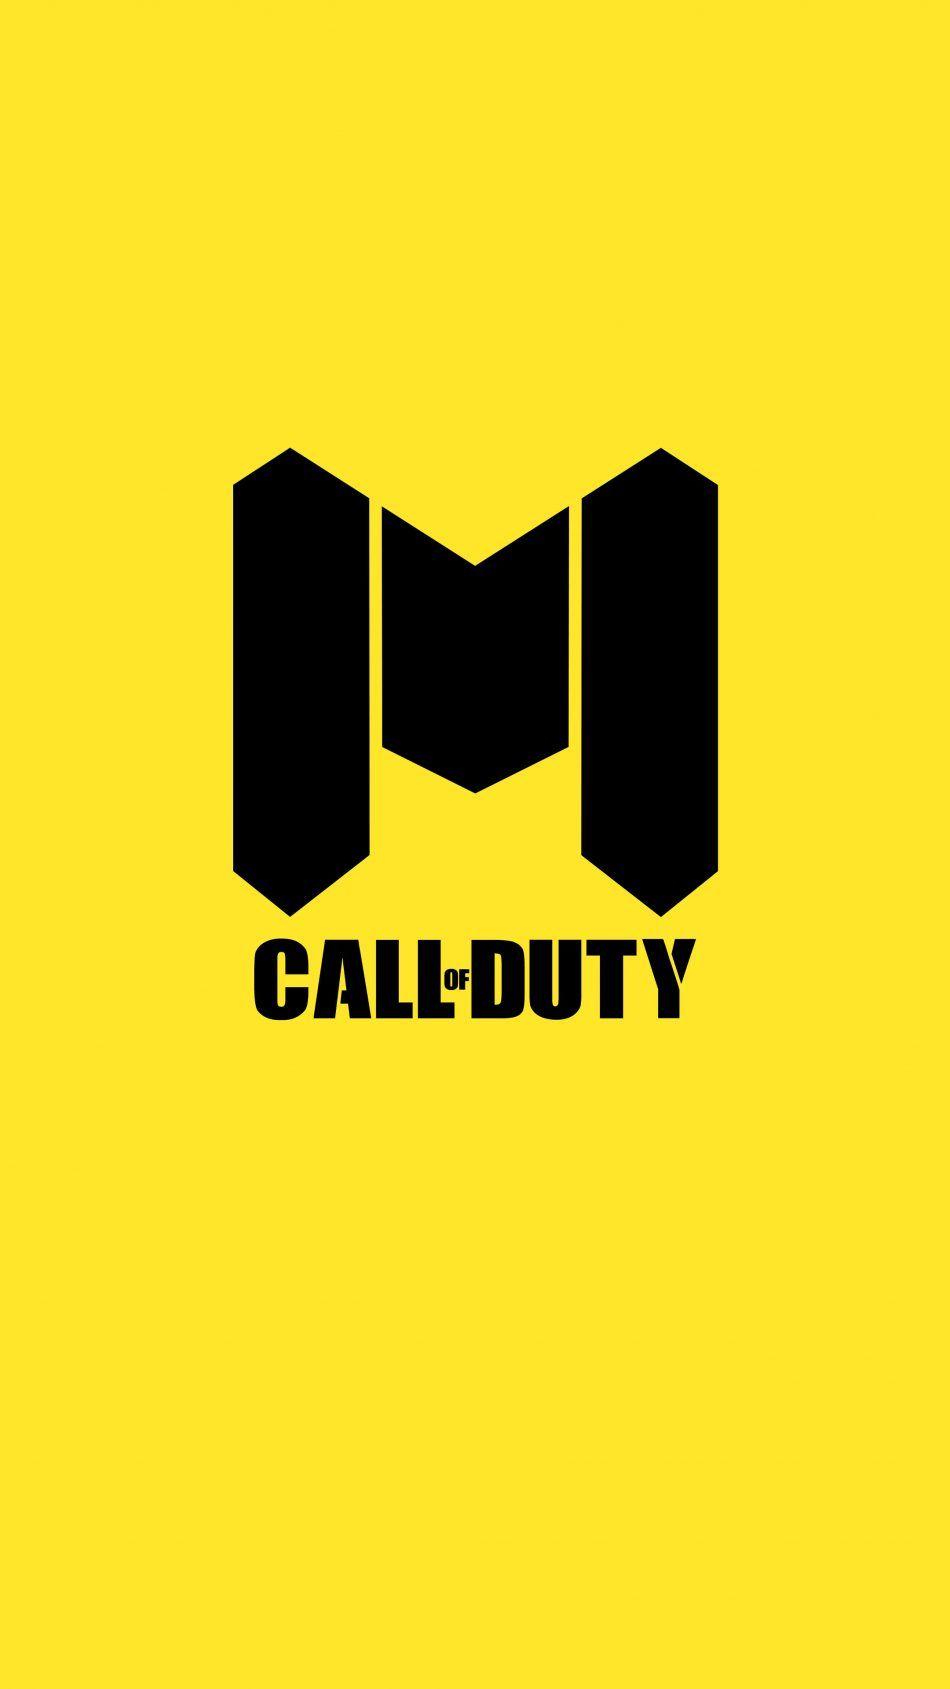 Download Call of Duty Mobile Logo Yellow Background Free